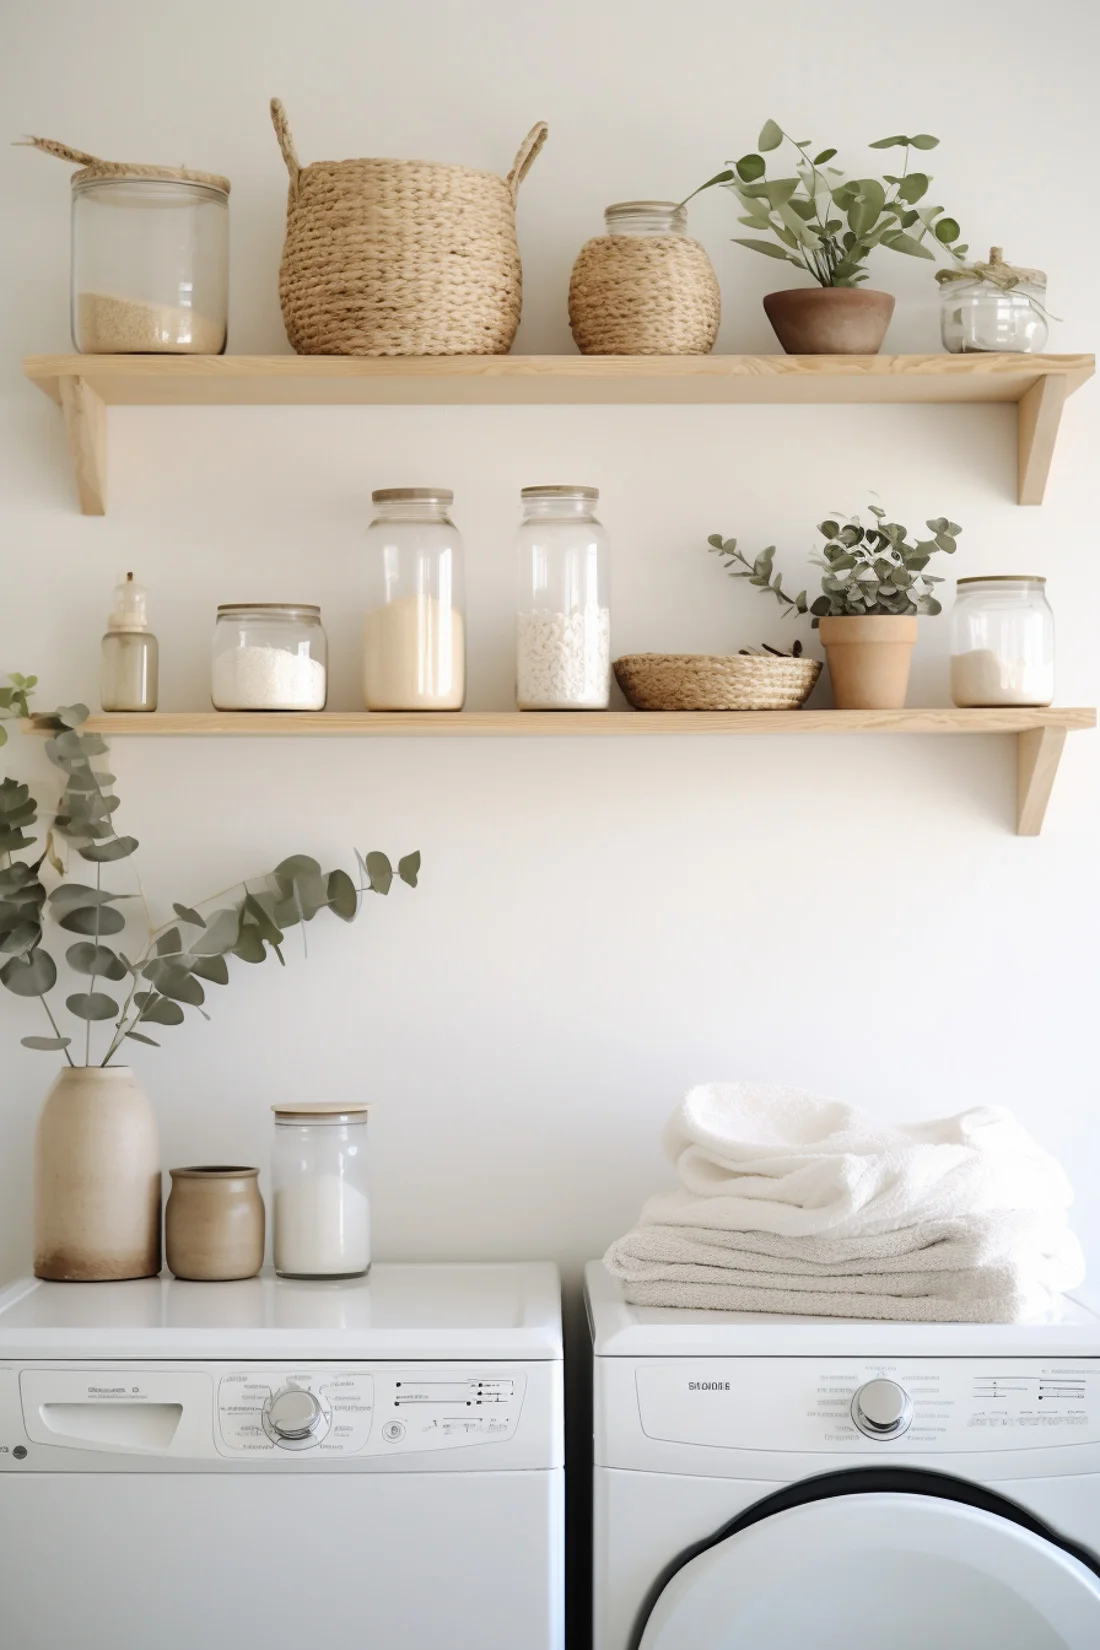 laundry room shelf with baskets and supplies in jars